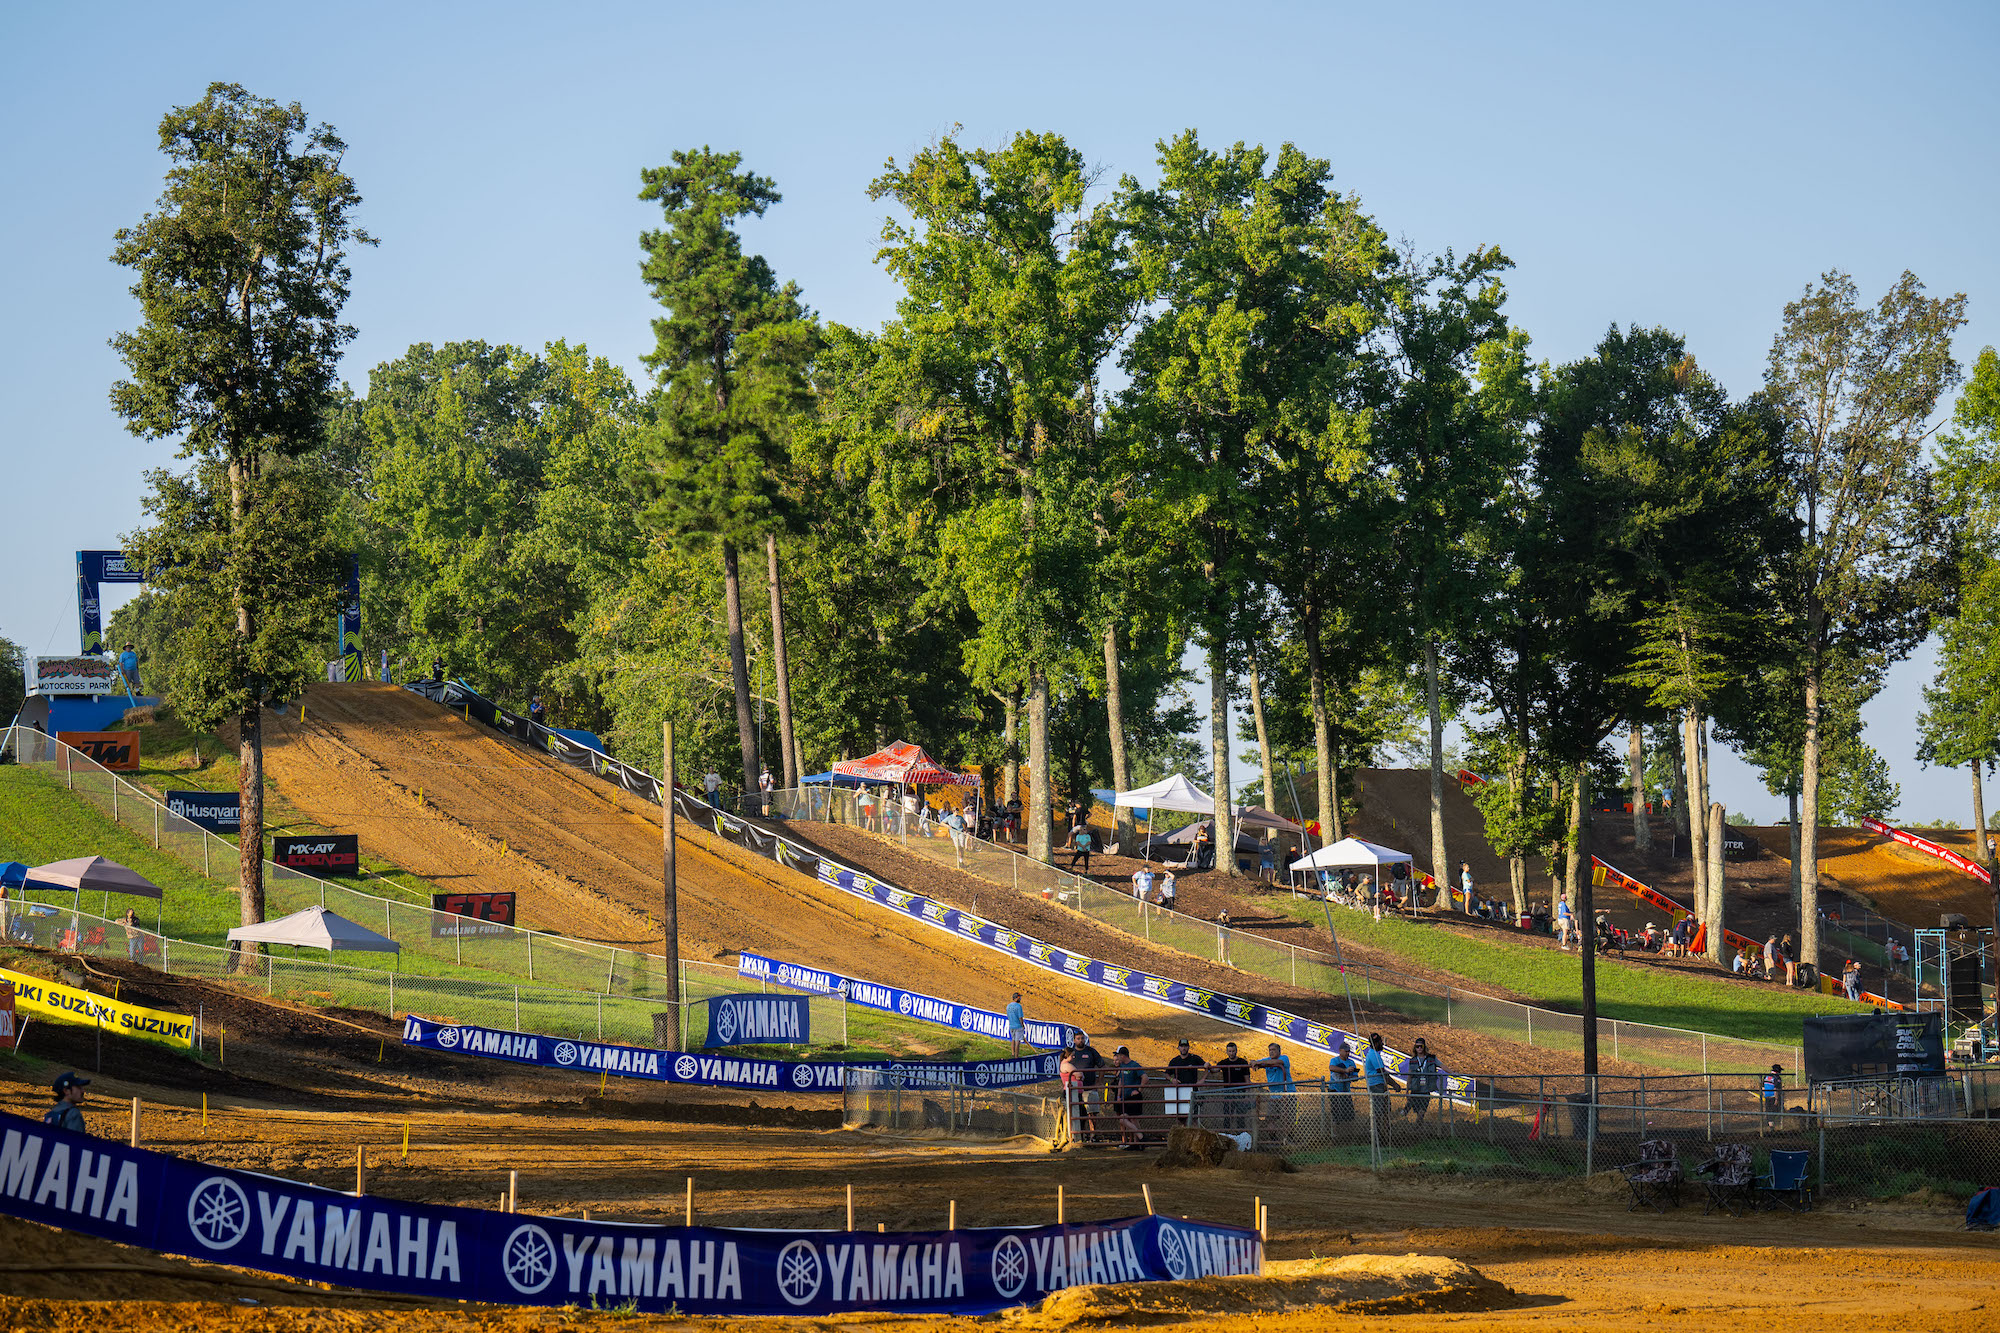 Yamaha Motor Corporation Continues Support as Manufacturer Partner of Pro Motocross Championship